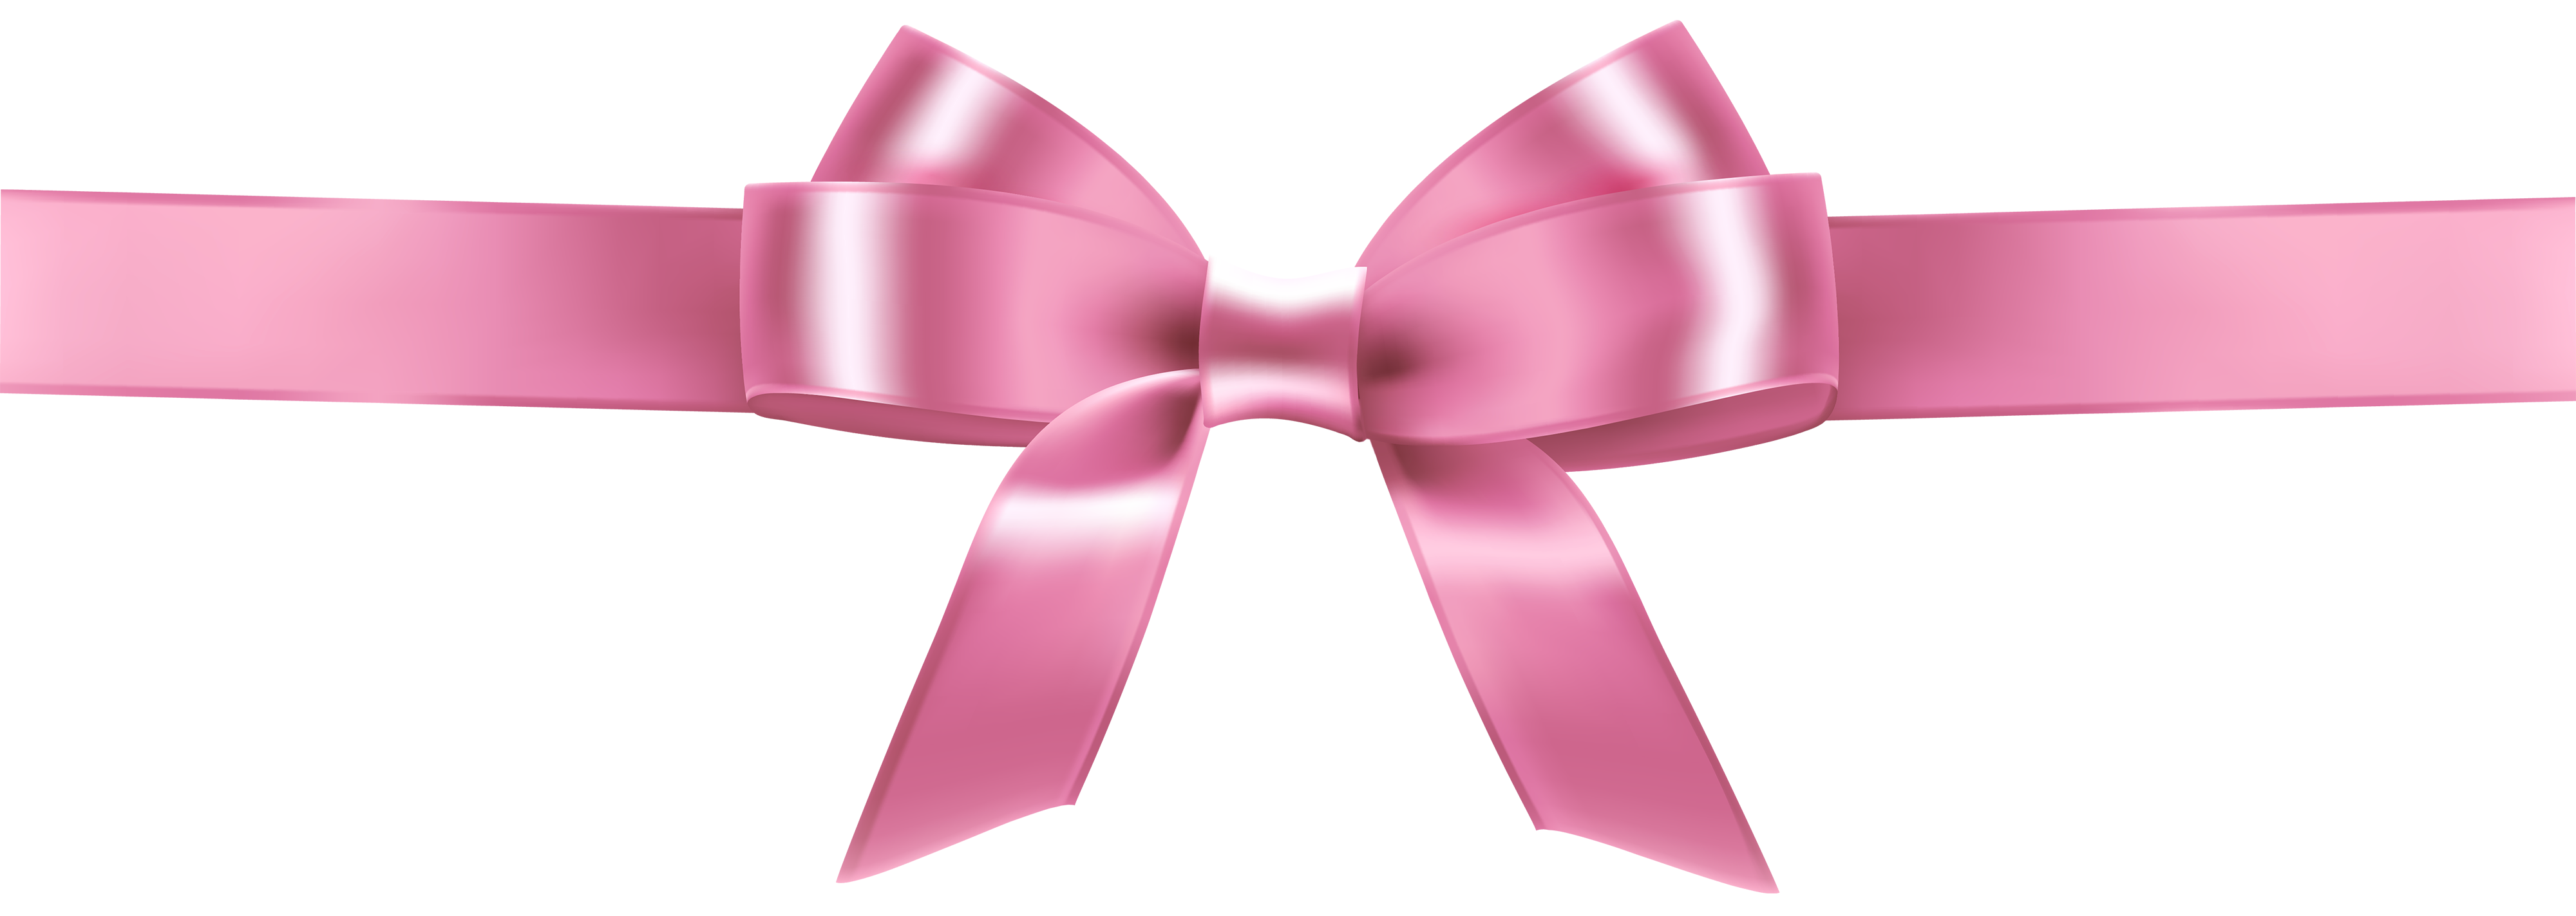 Baby Love Bow image